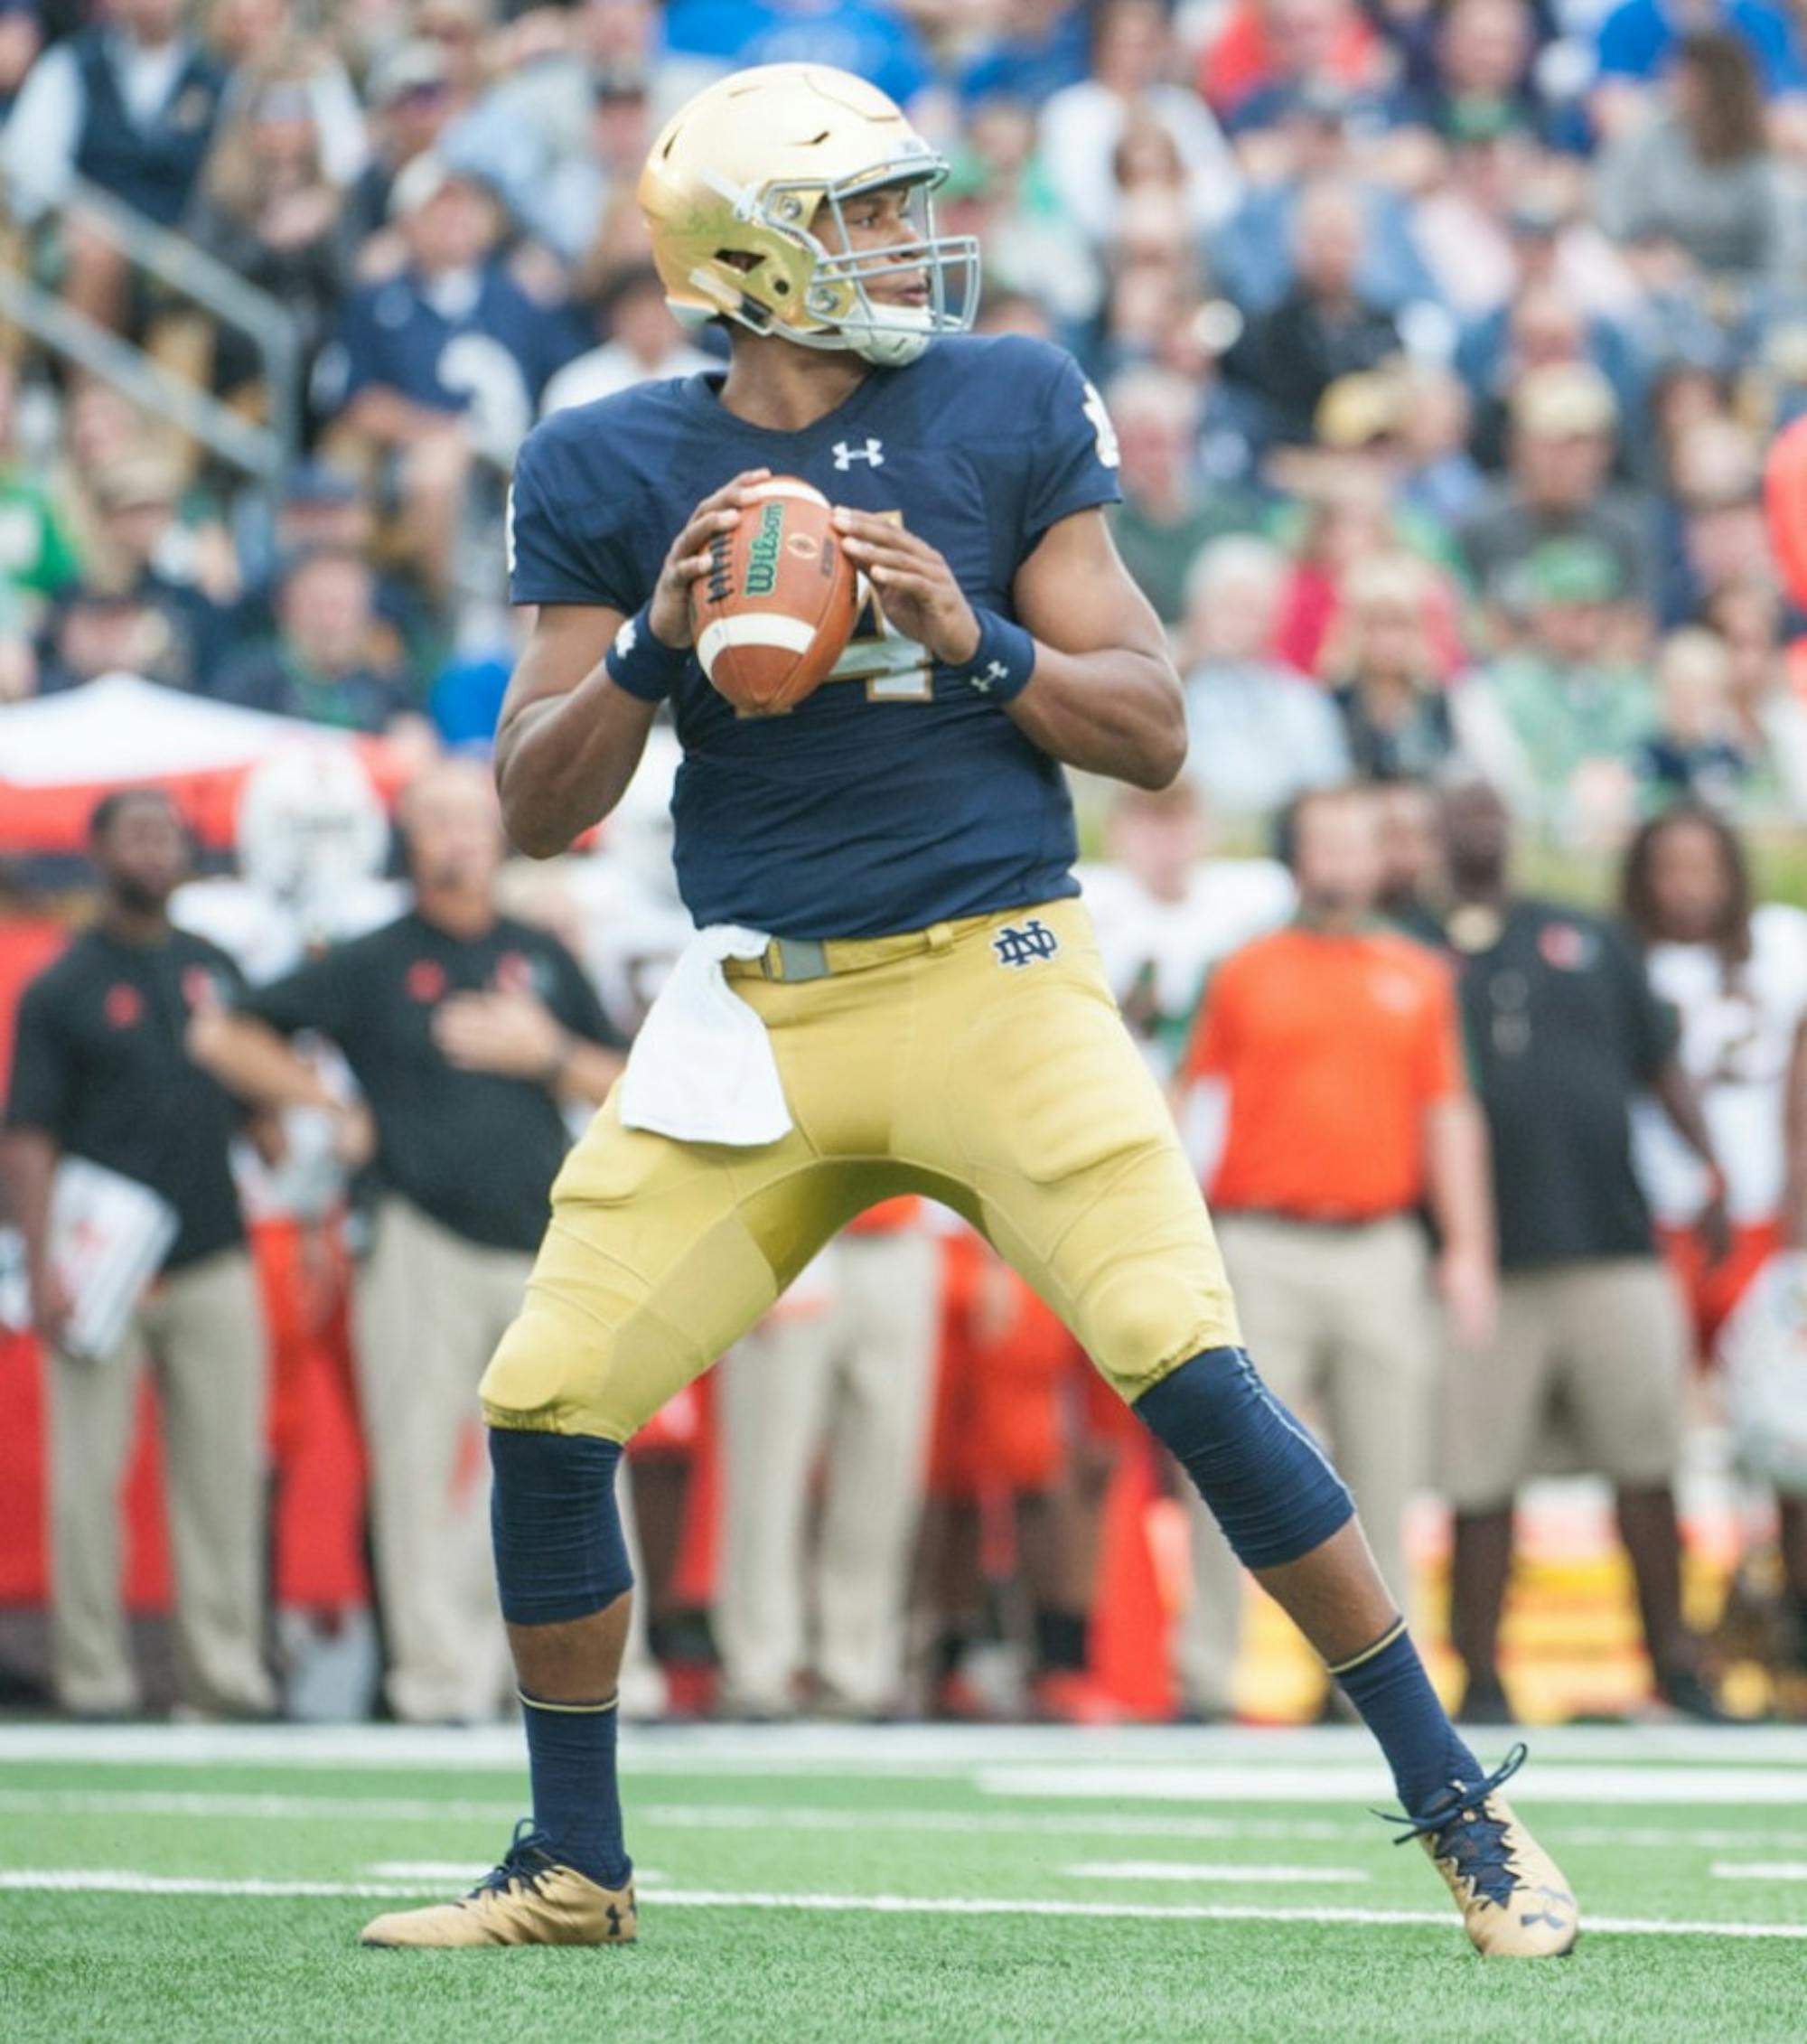 Irish junior quarterback DeShone Kizer drops back during Notre Dame’s win. He finished 25-for-38 for 263 yards and two touchdowns.